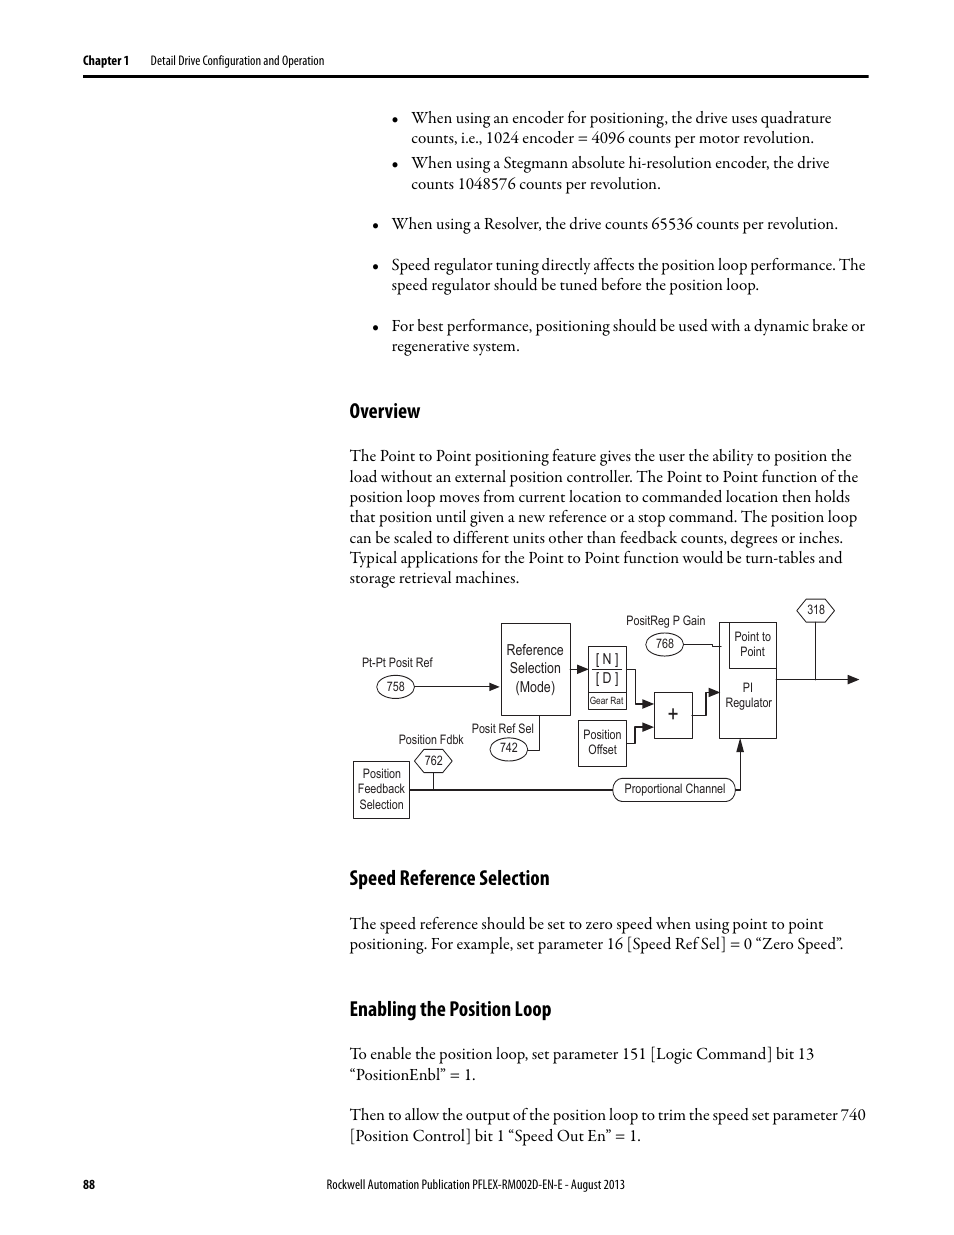 Overview, Speed reference selection, Enabling the position loop | Rockwell Automation 20D PowerFlex 700S with Phase I Control Reference Manual User Manual | Page 88 / 190